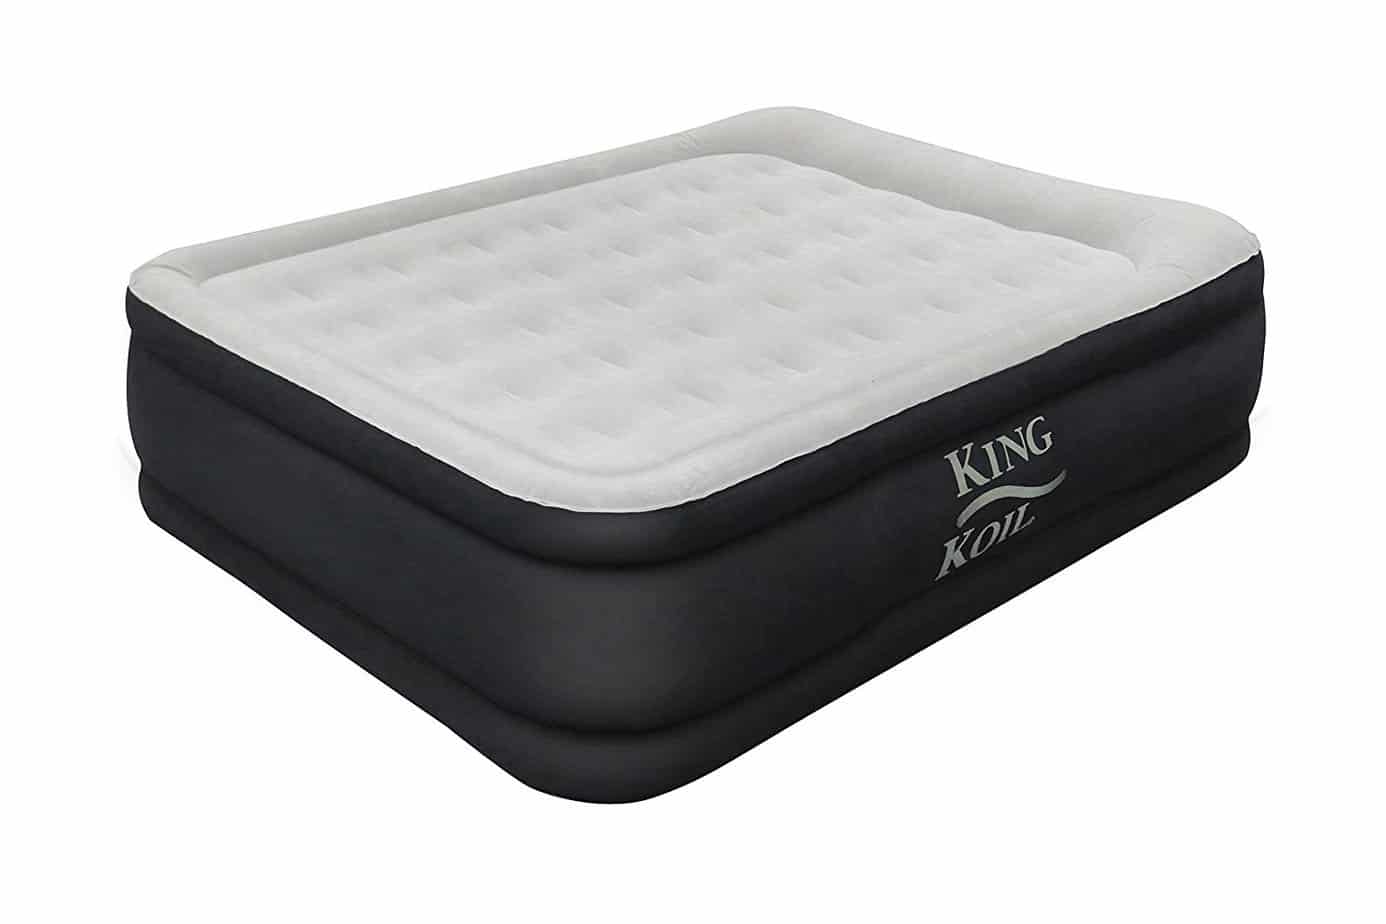 most reliable camping air mattress